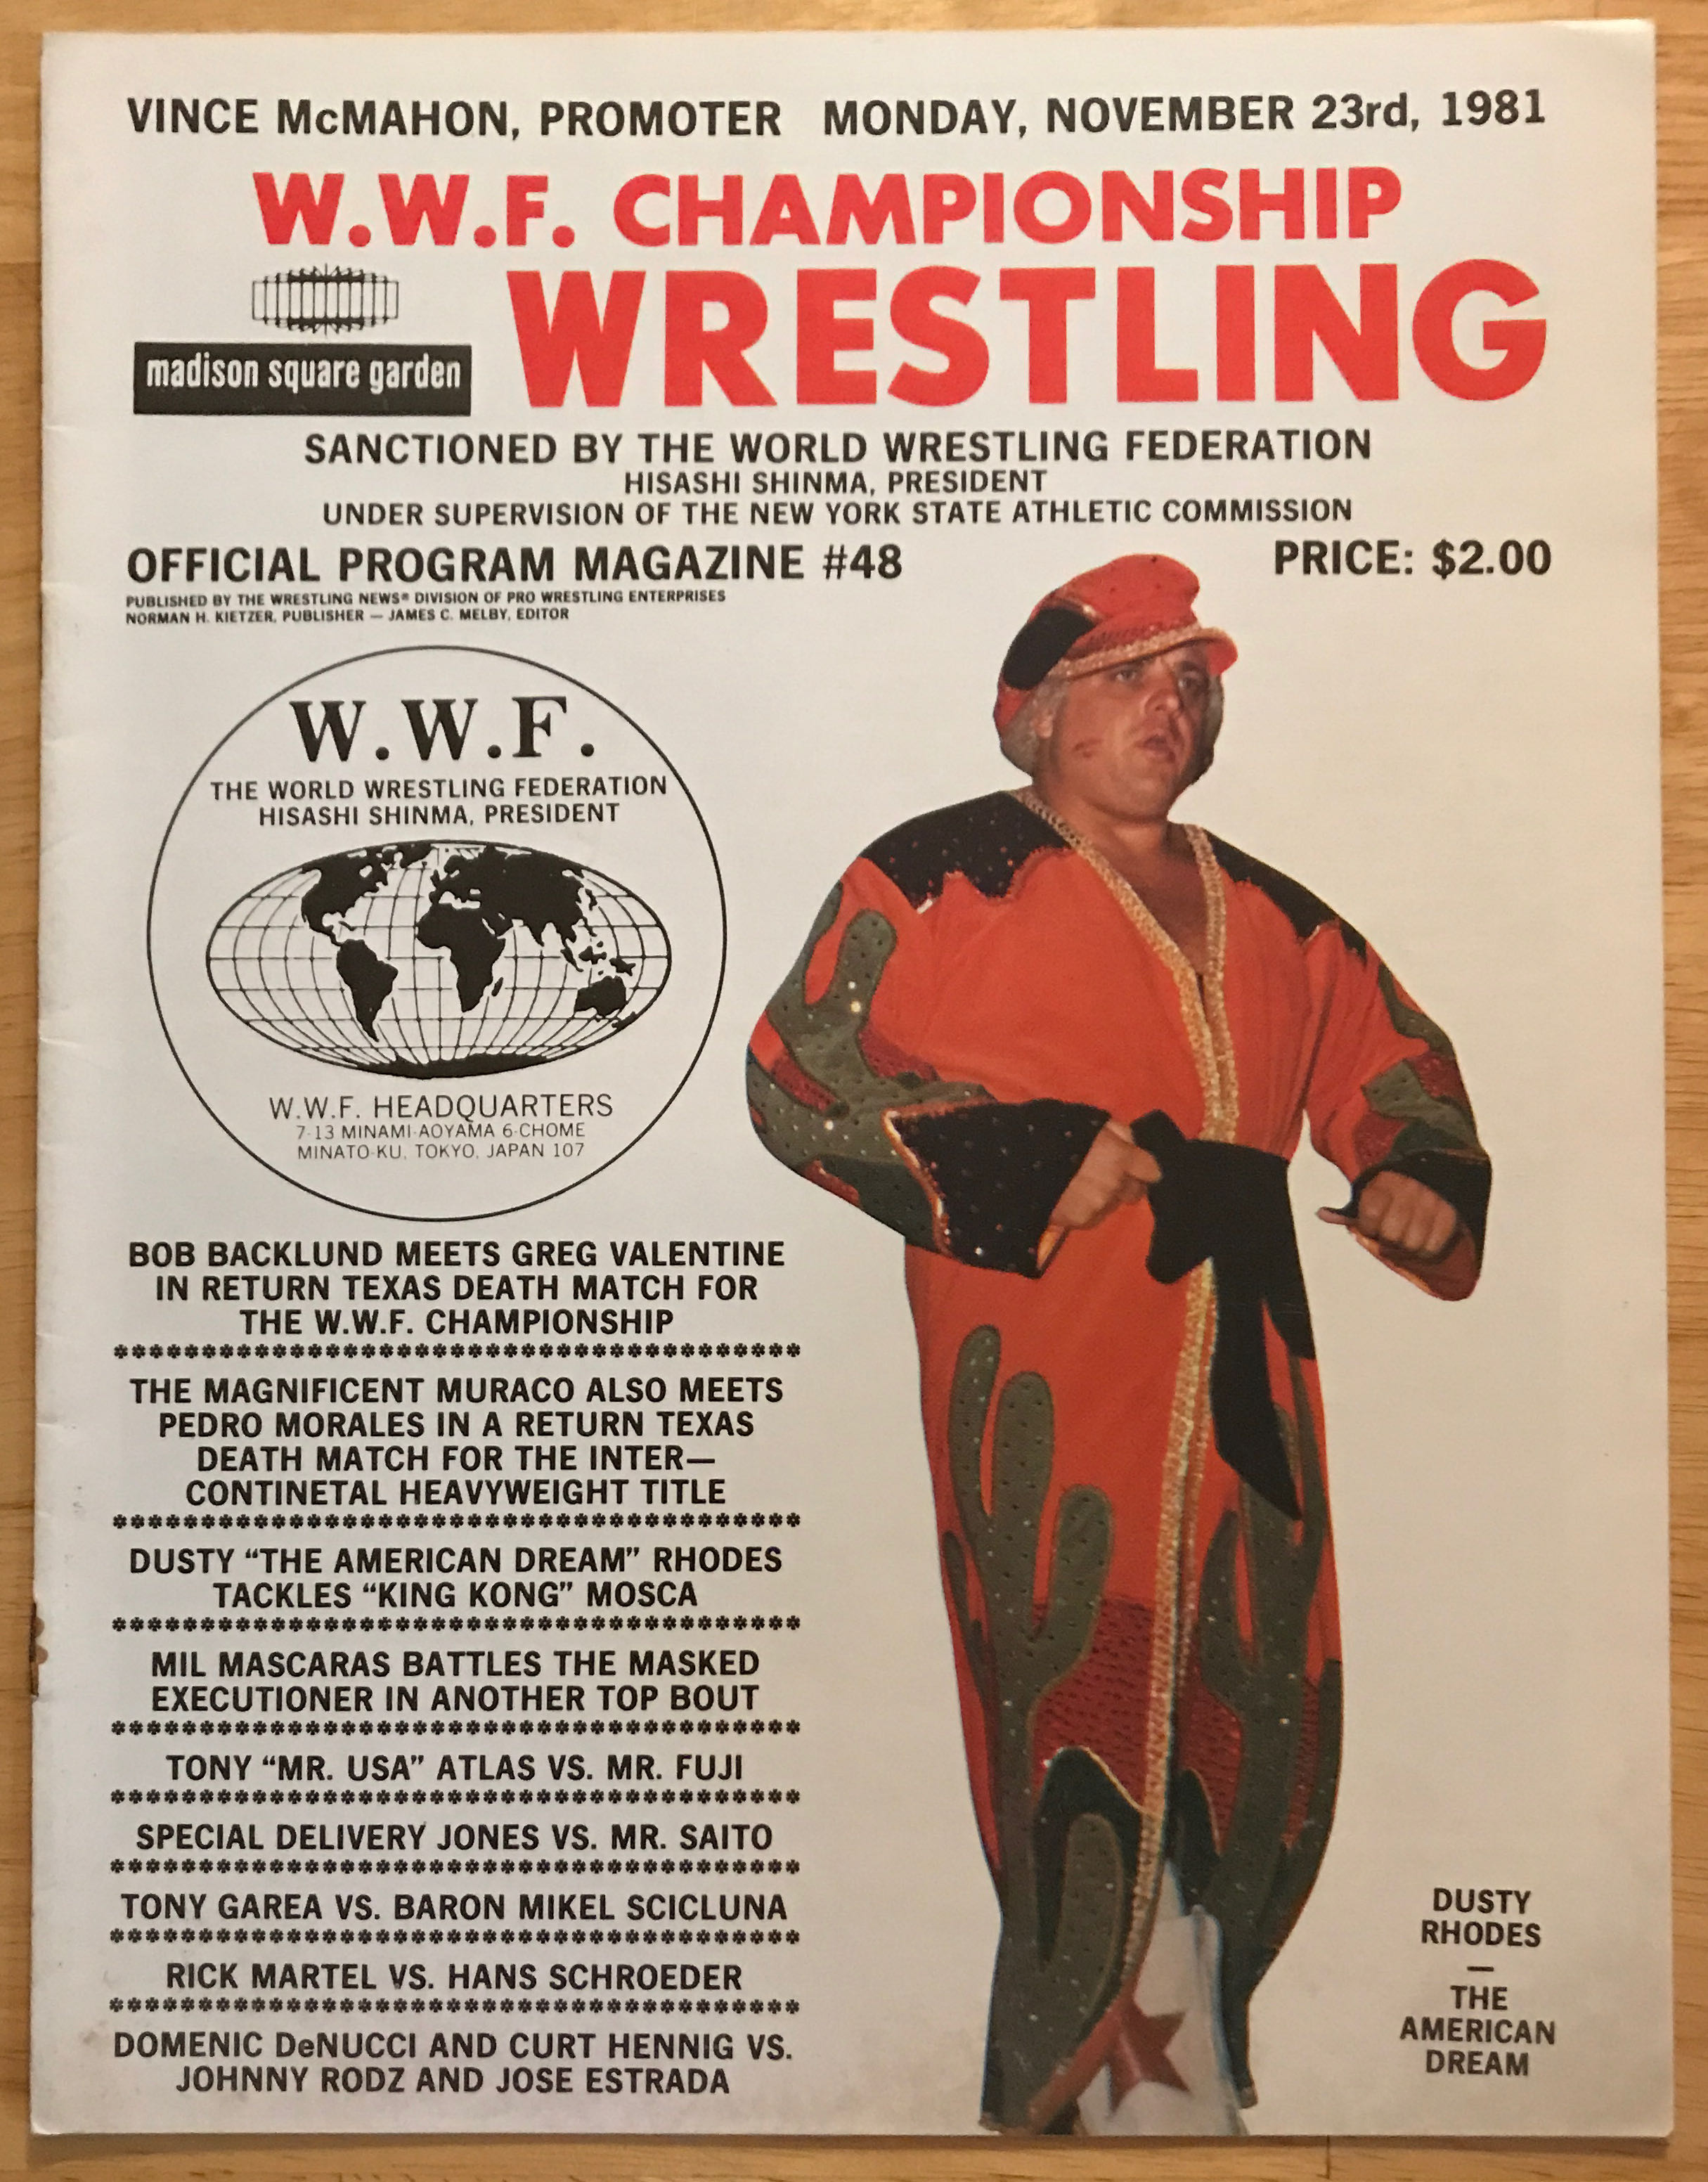 WWF Championship Wrestling from MSG Official Program Magazine #48 11/23/1981  (November) magazine collectible - Main Image 1